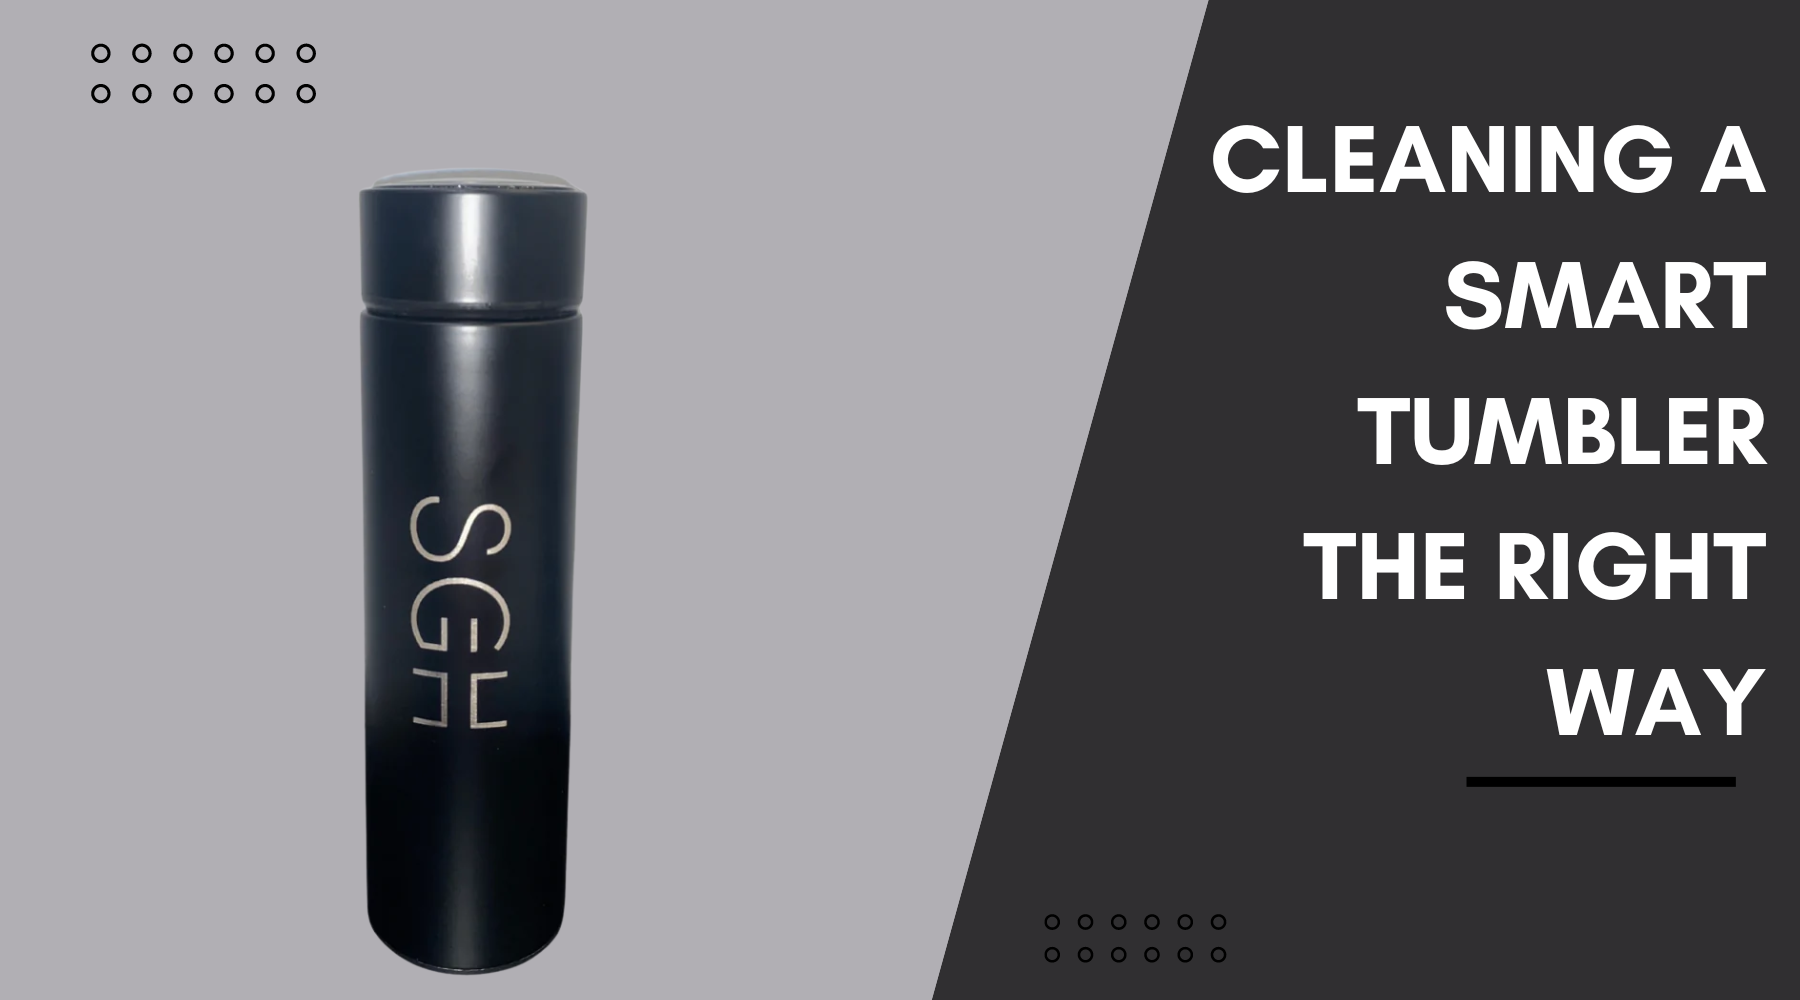 How to Properly Clean a Water Bottle/Smart Tumbler?